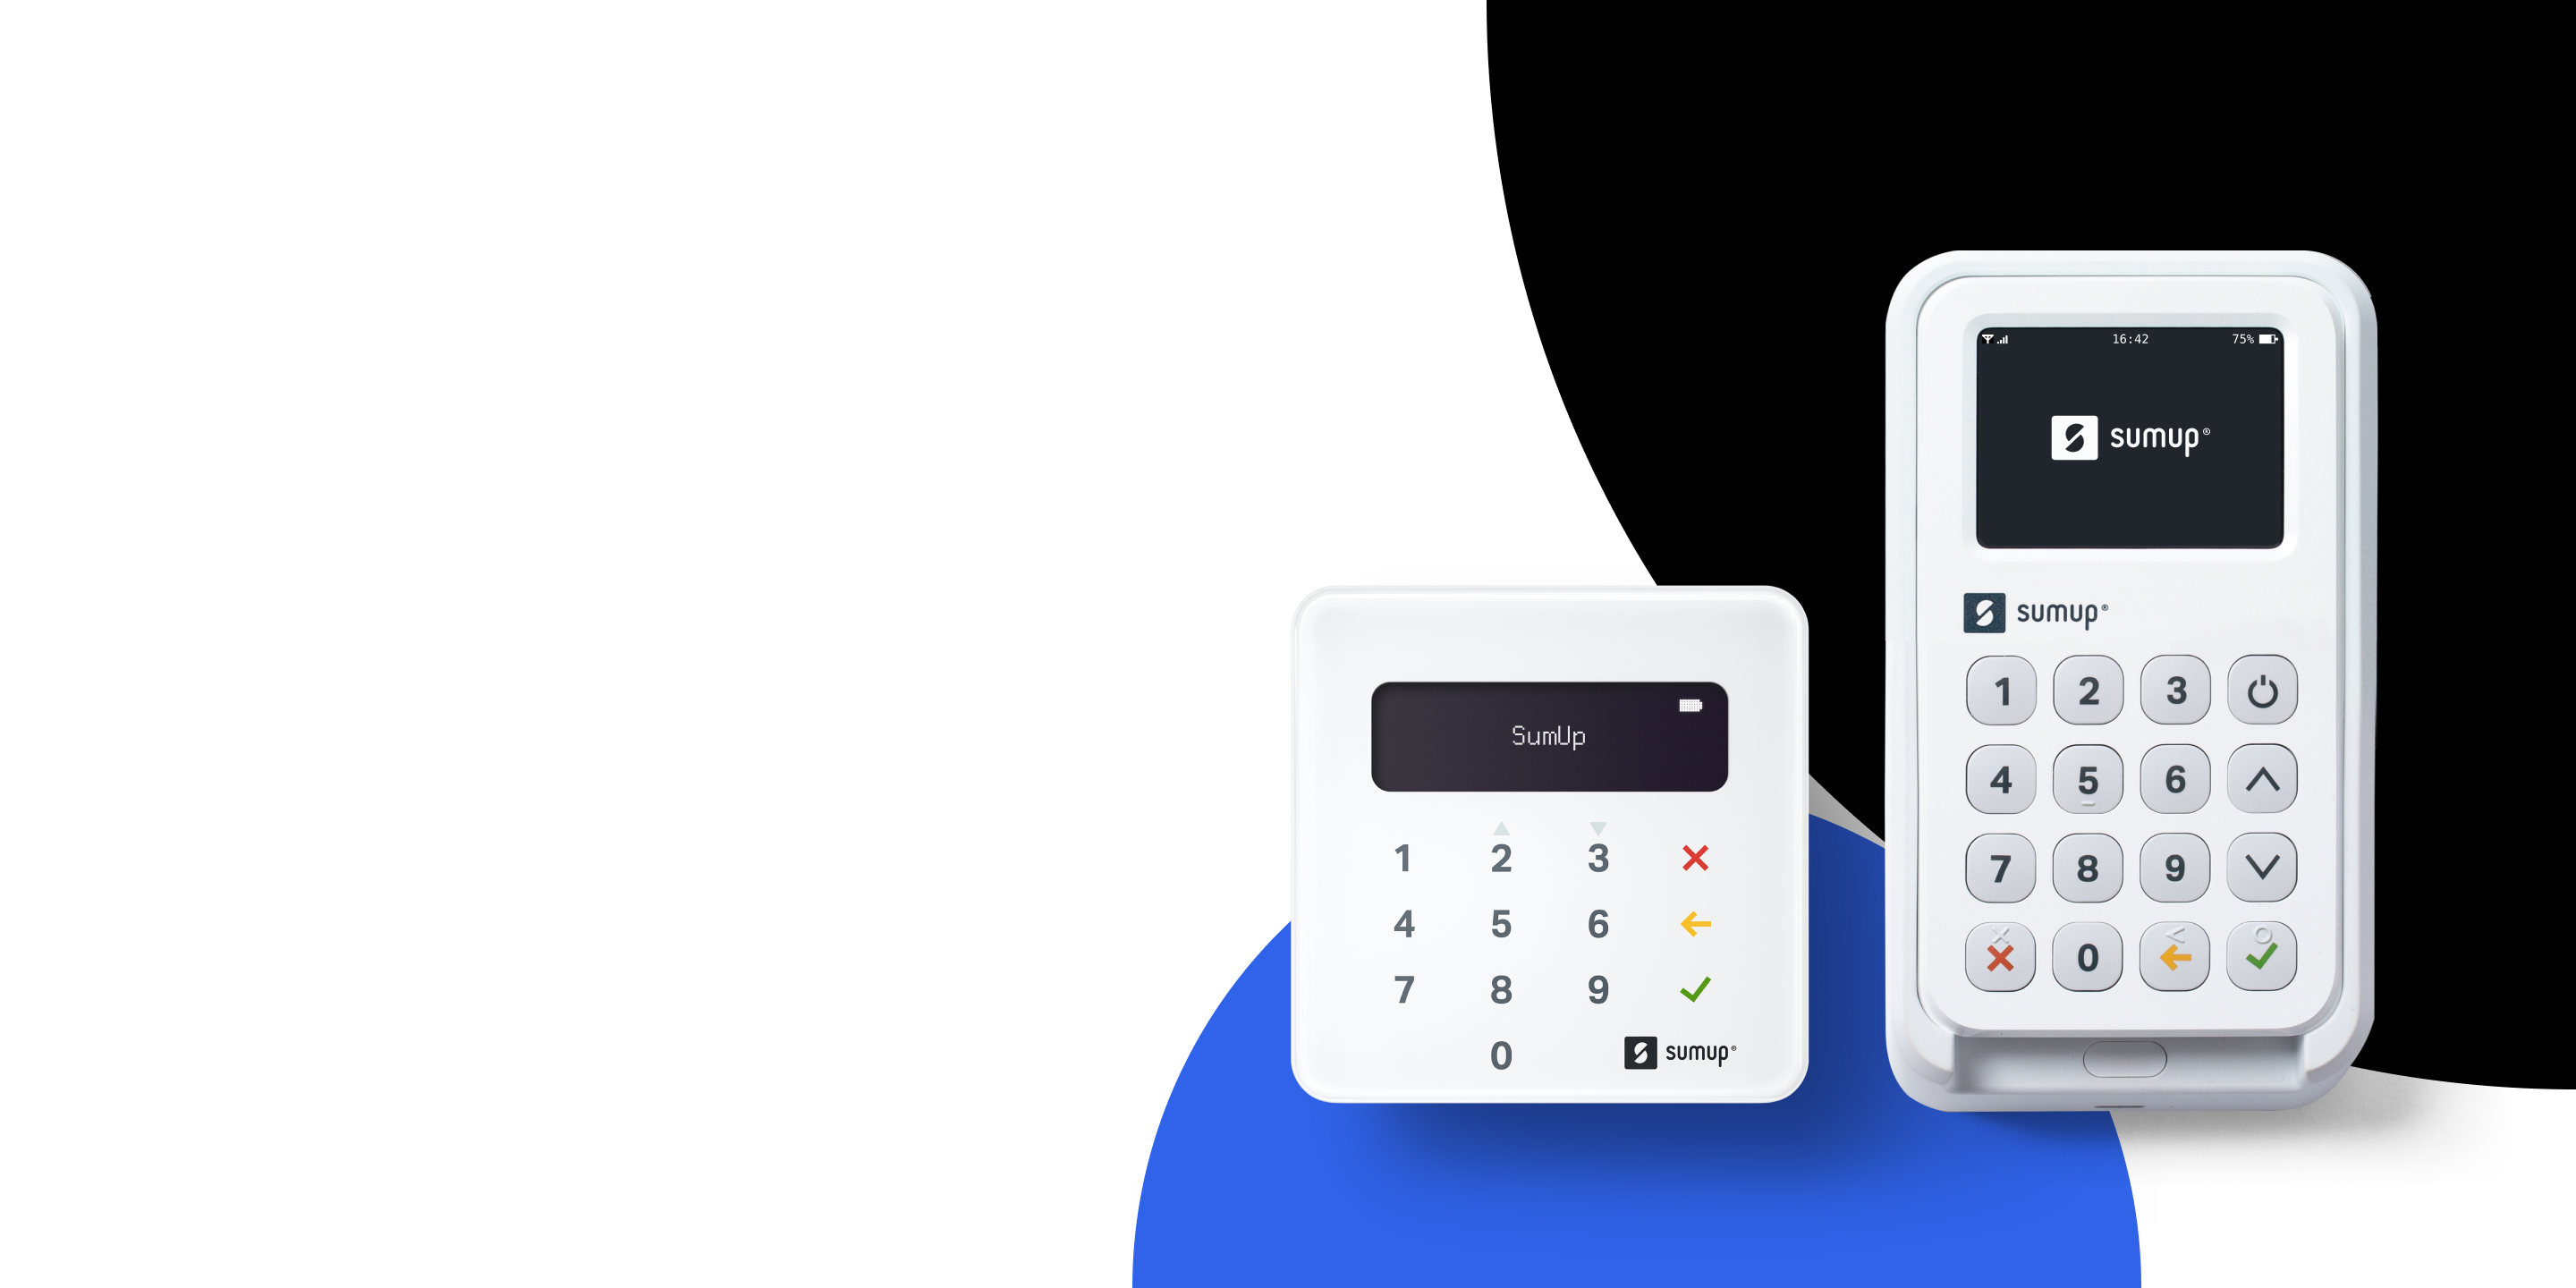 EMV Terminal - Mobile Credit Card Reader for Android and iPhone